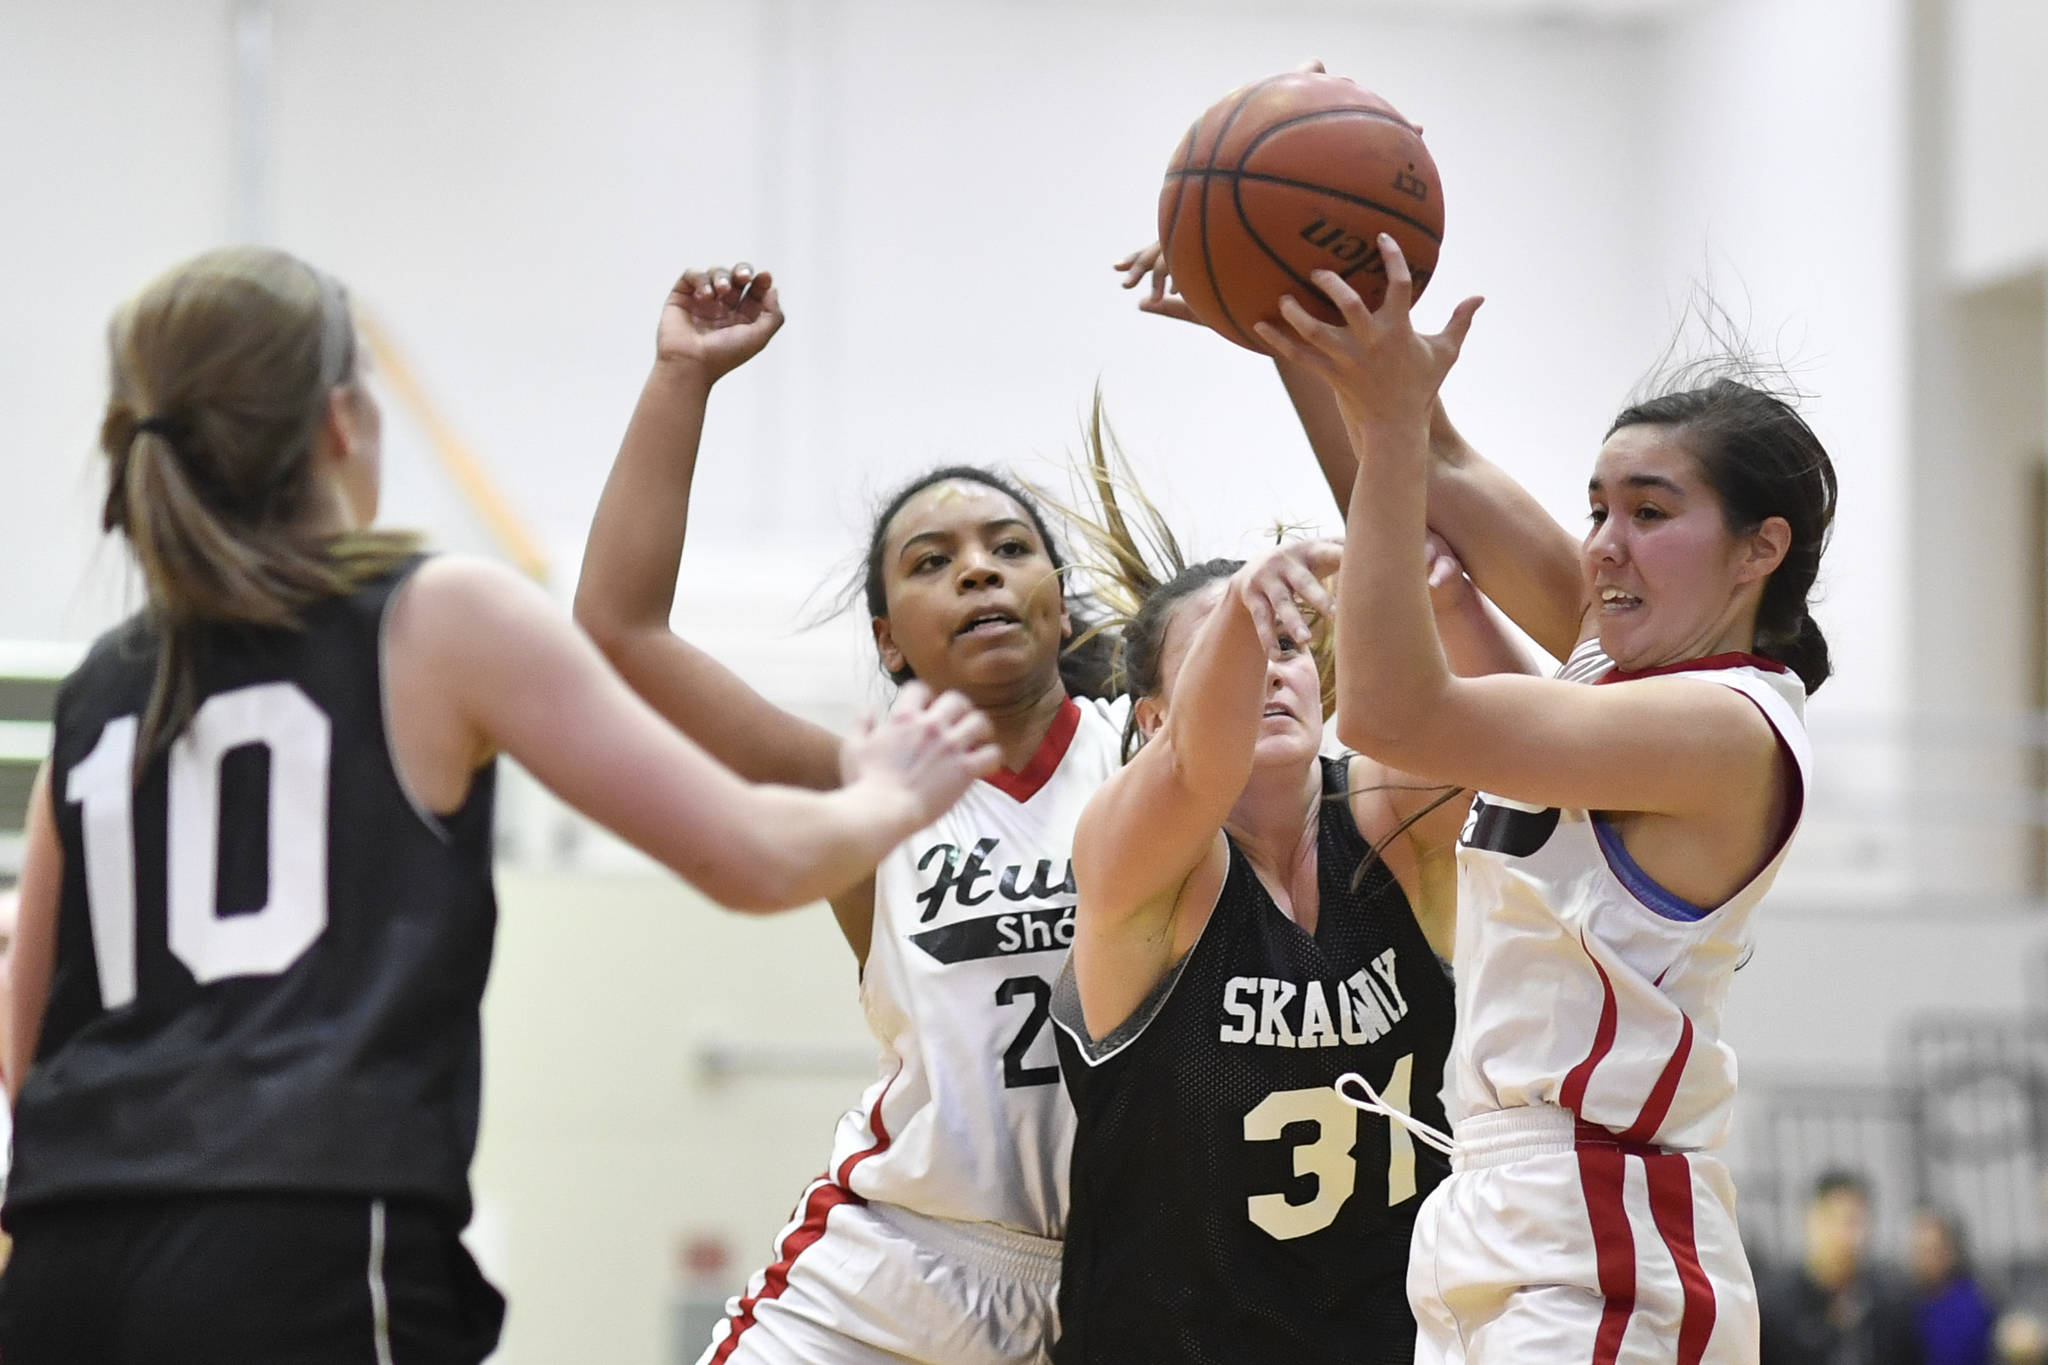 Skagway’s Tiffanie Ames, center, has the ball stripped away by Hoonah’s Melissa Fisher, right, and Zhane White at the Juneau Lions Club 73rd Annual Gold Medal Basketball Tournament at Juneau-Douglas High School: Yadaa.at Kalé on Tuesday, March 19, 2019. Skagway won 80-42. (Michael Penn | Juneau Empire)